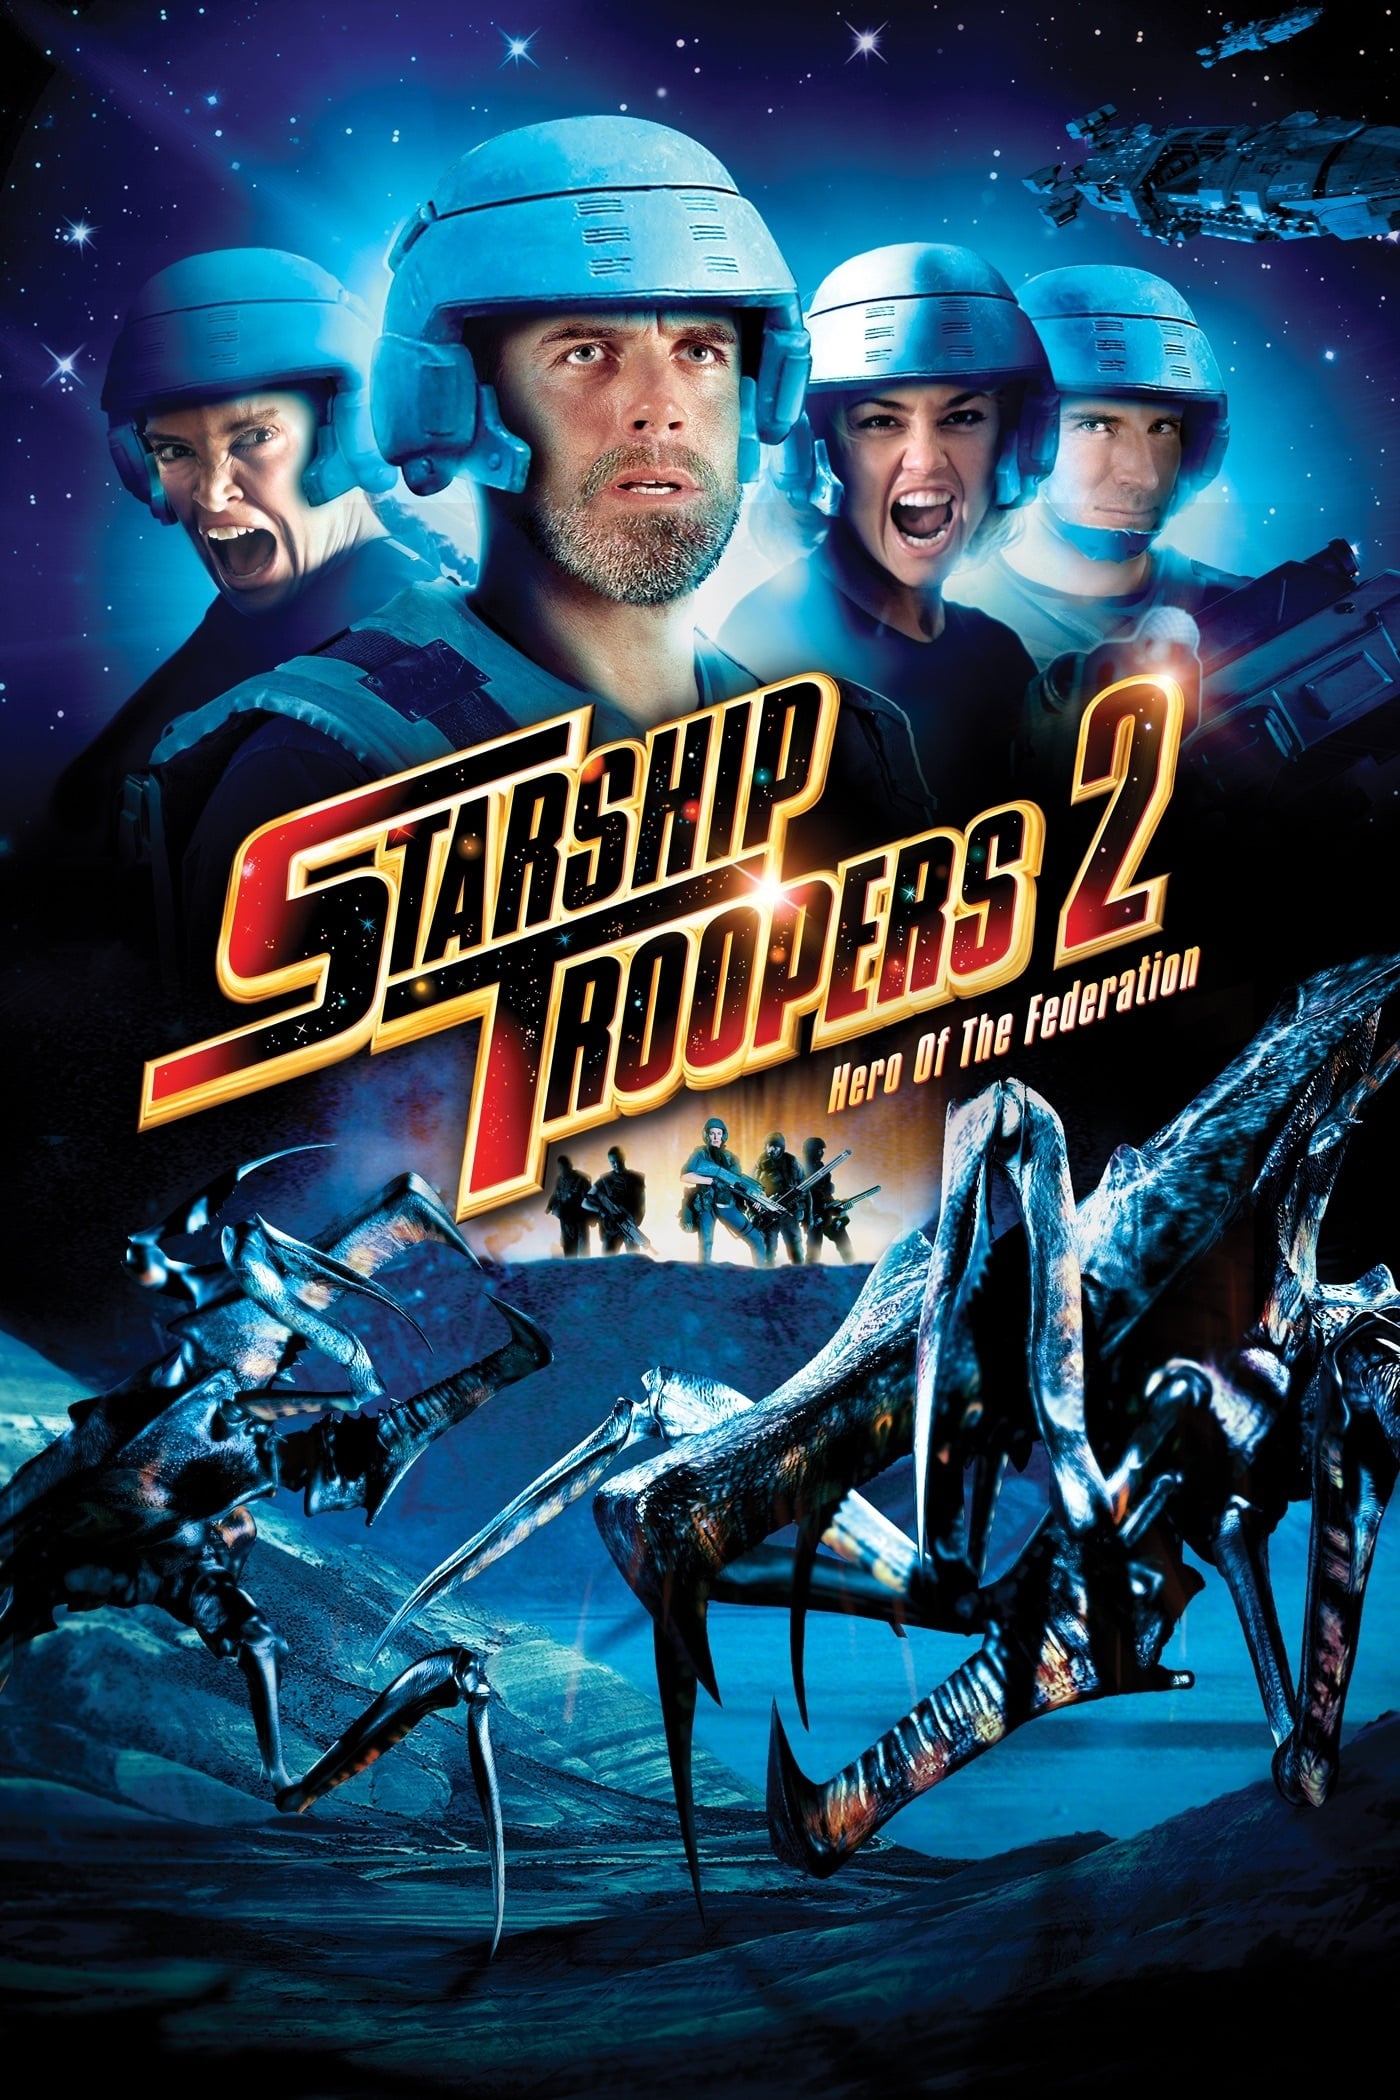 Starship Troopers 2: Hero of the Federation on FREECABLE TV